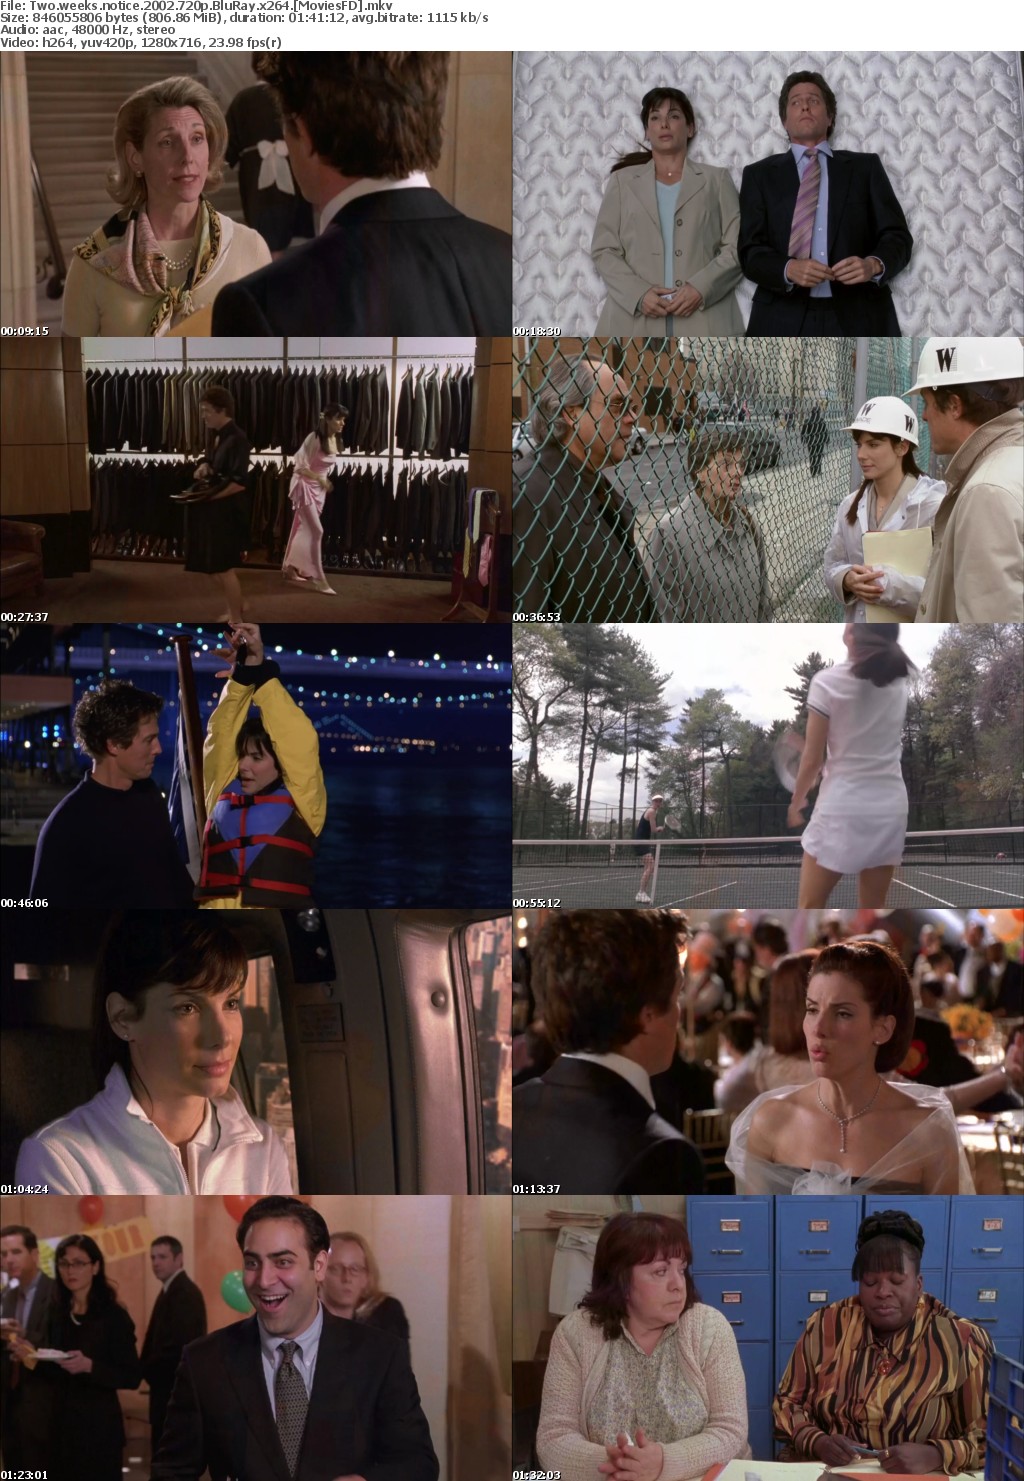 Two Weeks Notice (2002) 720P Bluray X264 Moviesfd